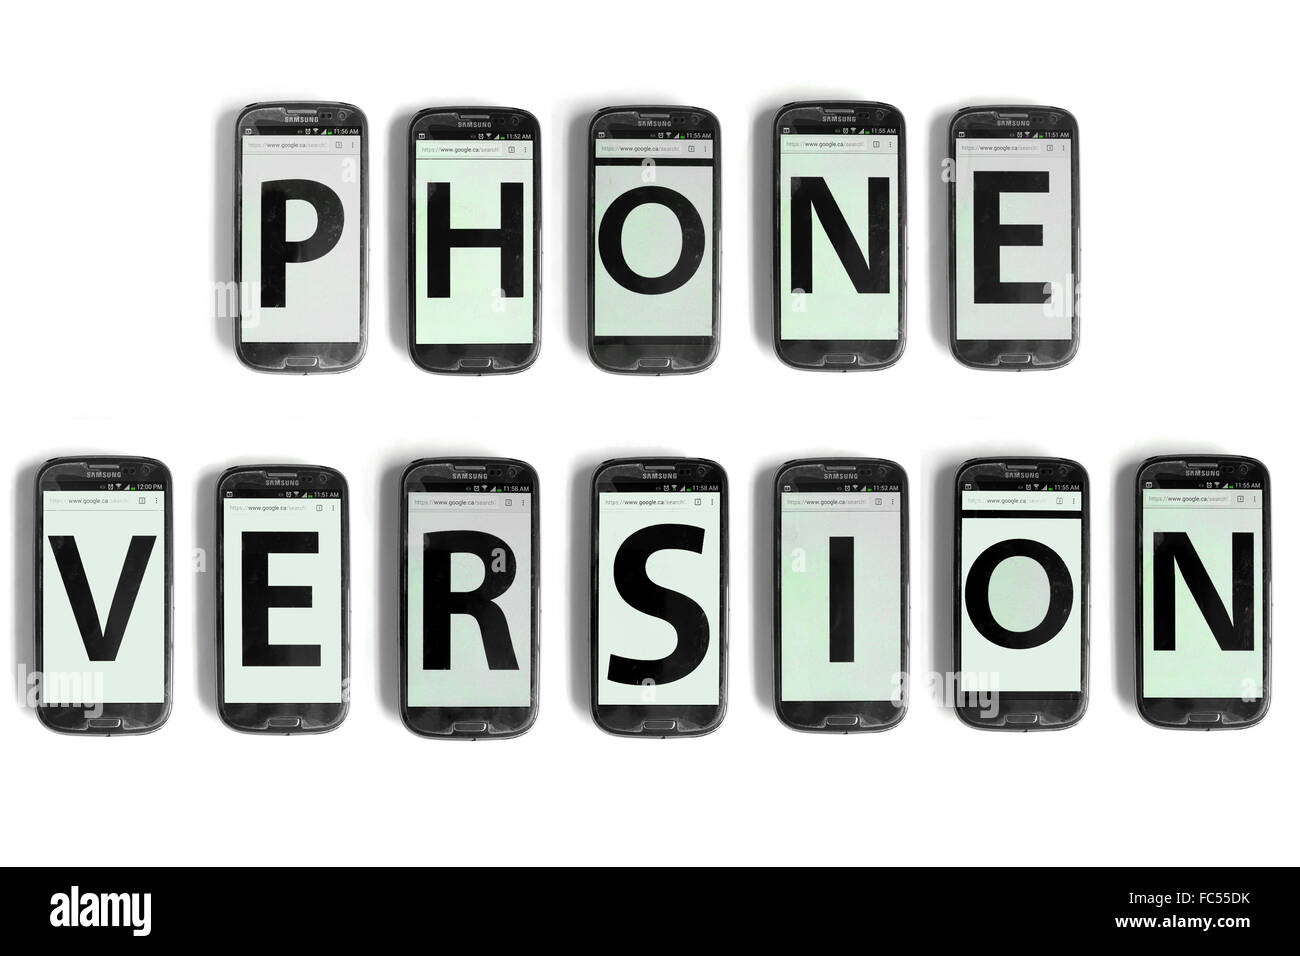 Phone Version written on the screens of smartphones photographed against a white background. Stock Photo